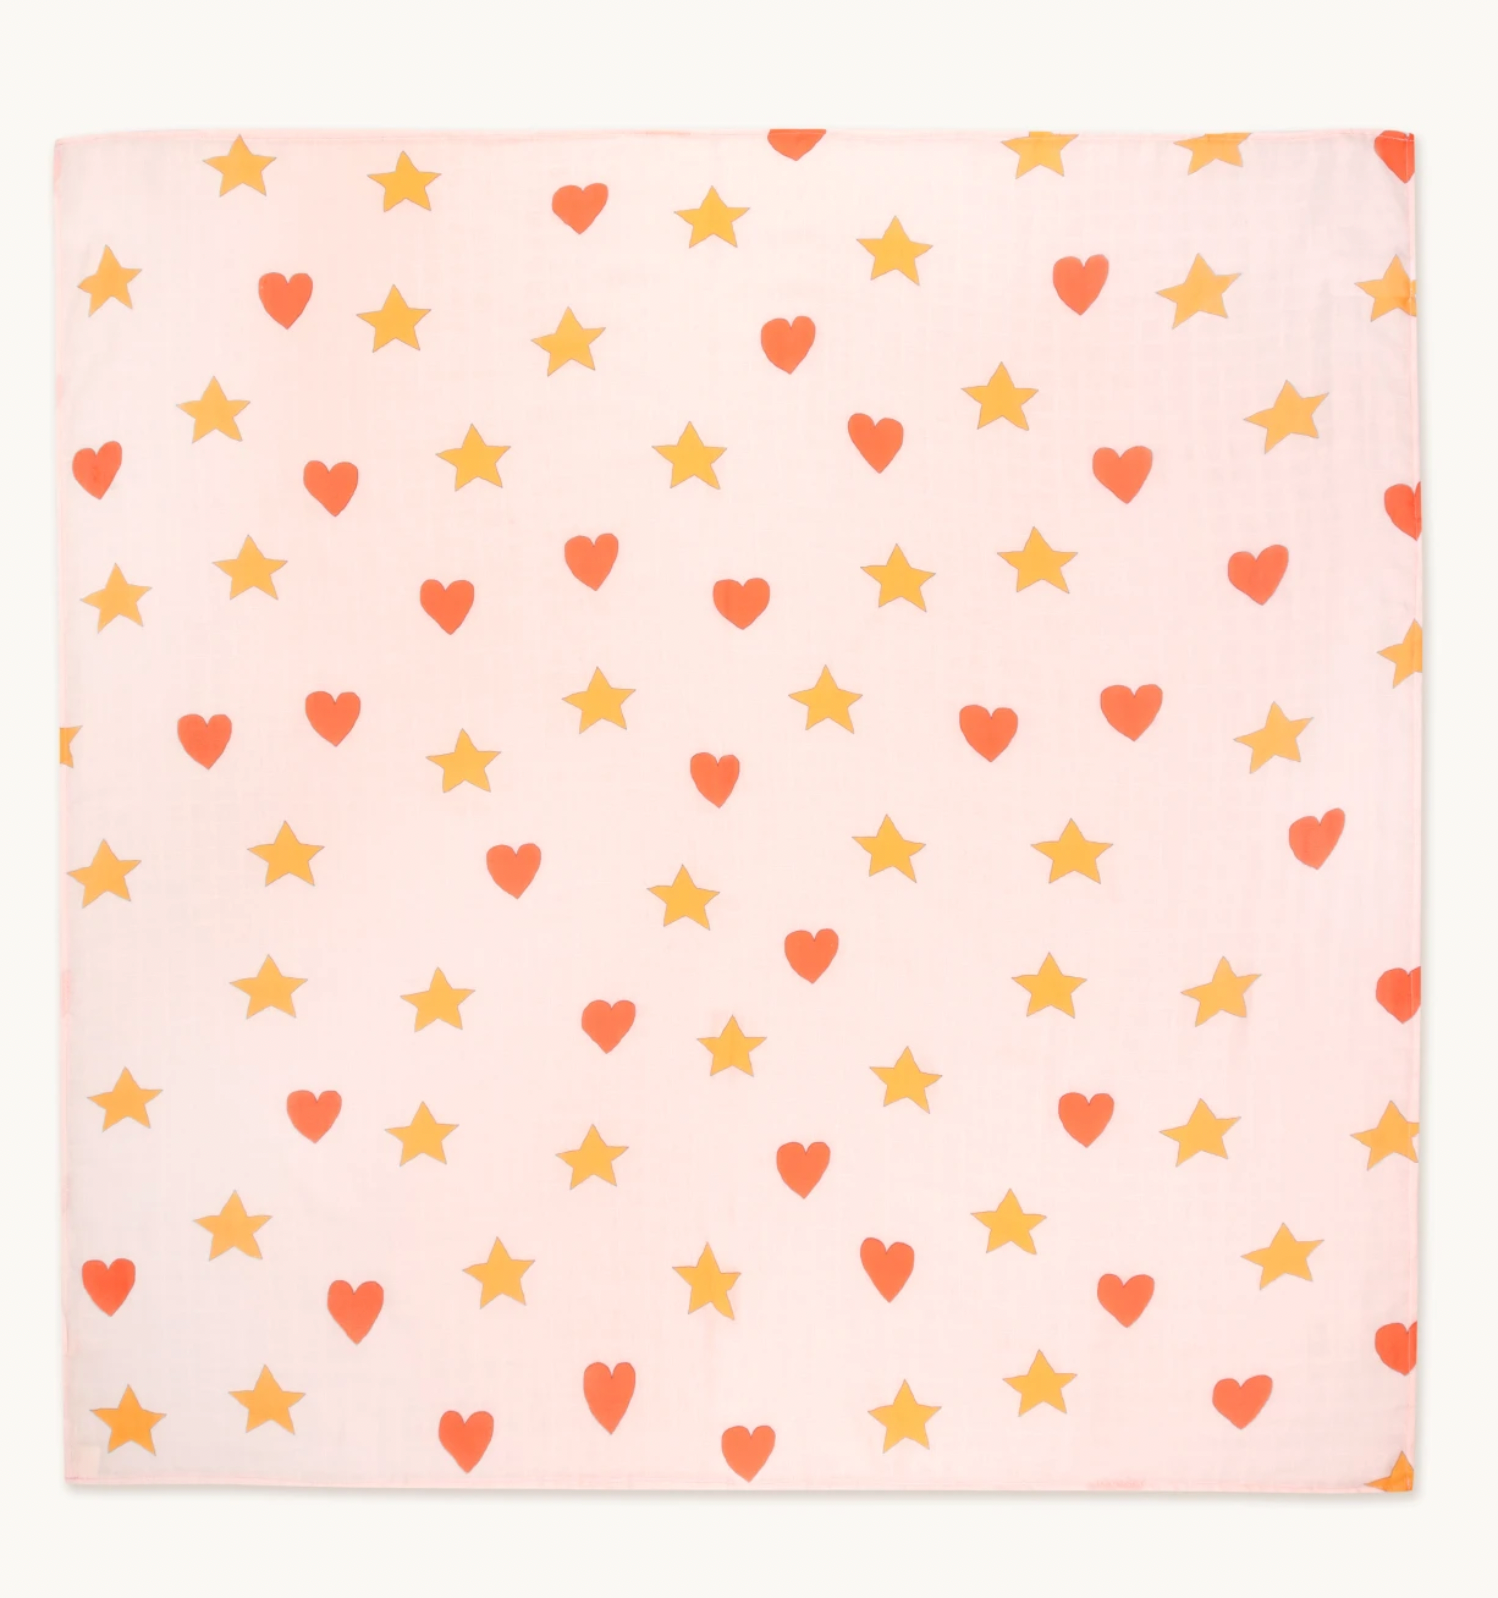 Tiny Cottons Hearts & Stars Swaddle - Pastel Pink